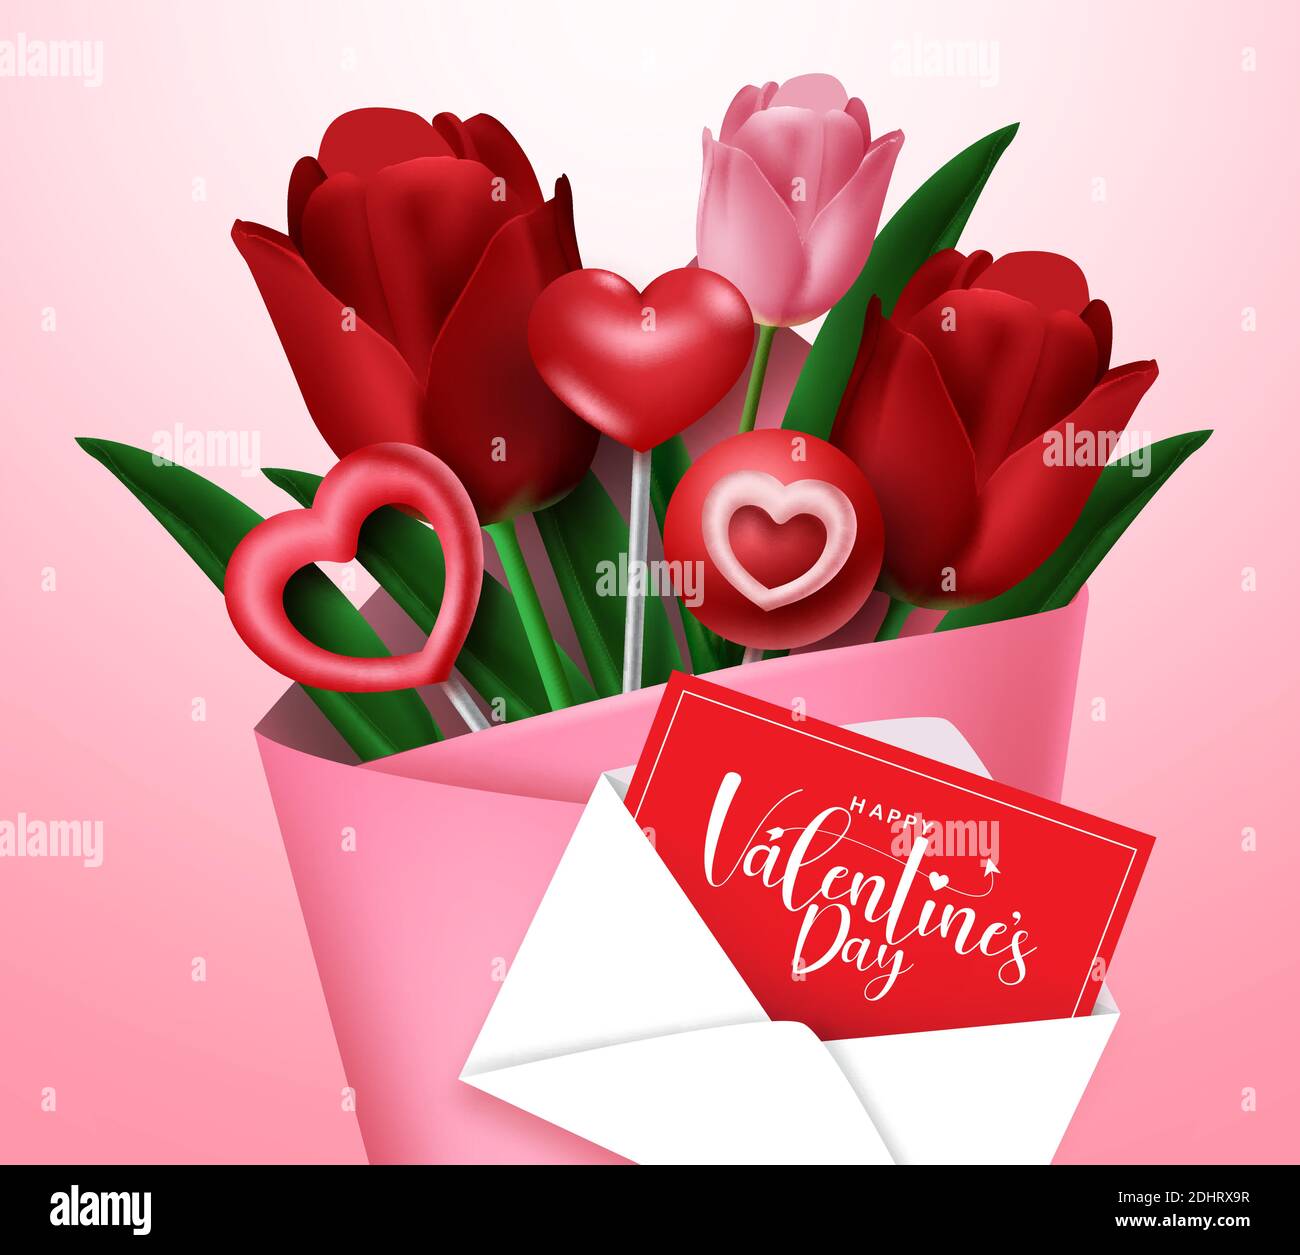 Valentine Bouquet Vector Background Design Happy Valentine S Day Text In Greeting Card With Tulip Flowers And Hearts Element For Valentines Day Gift Stock Vector Image Art Alamy